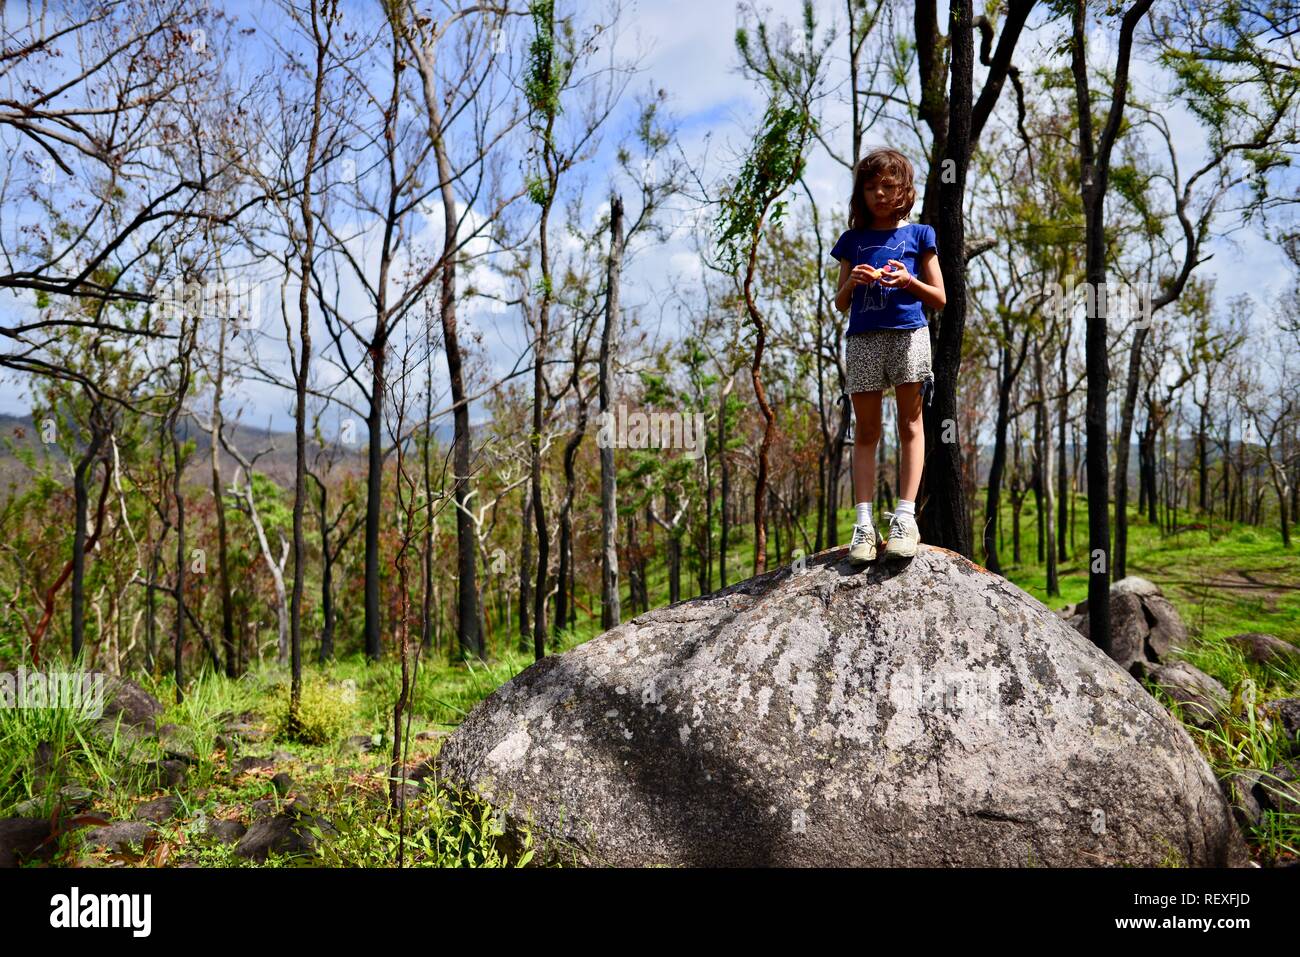 A young girl stands on top of a boulder alone in a forest, Mia Mia State Forest, Queensland, Australia Stock Photo